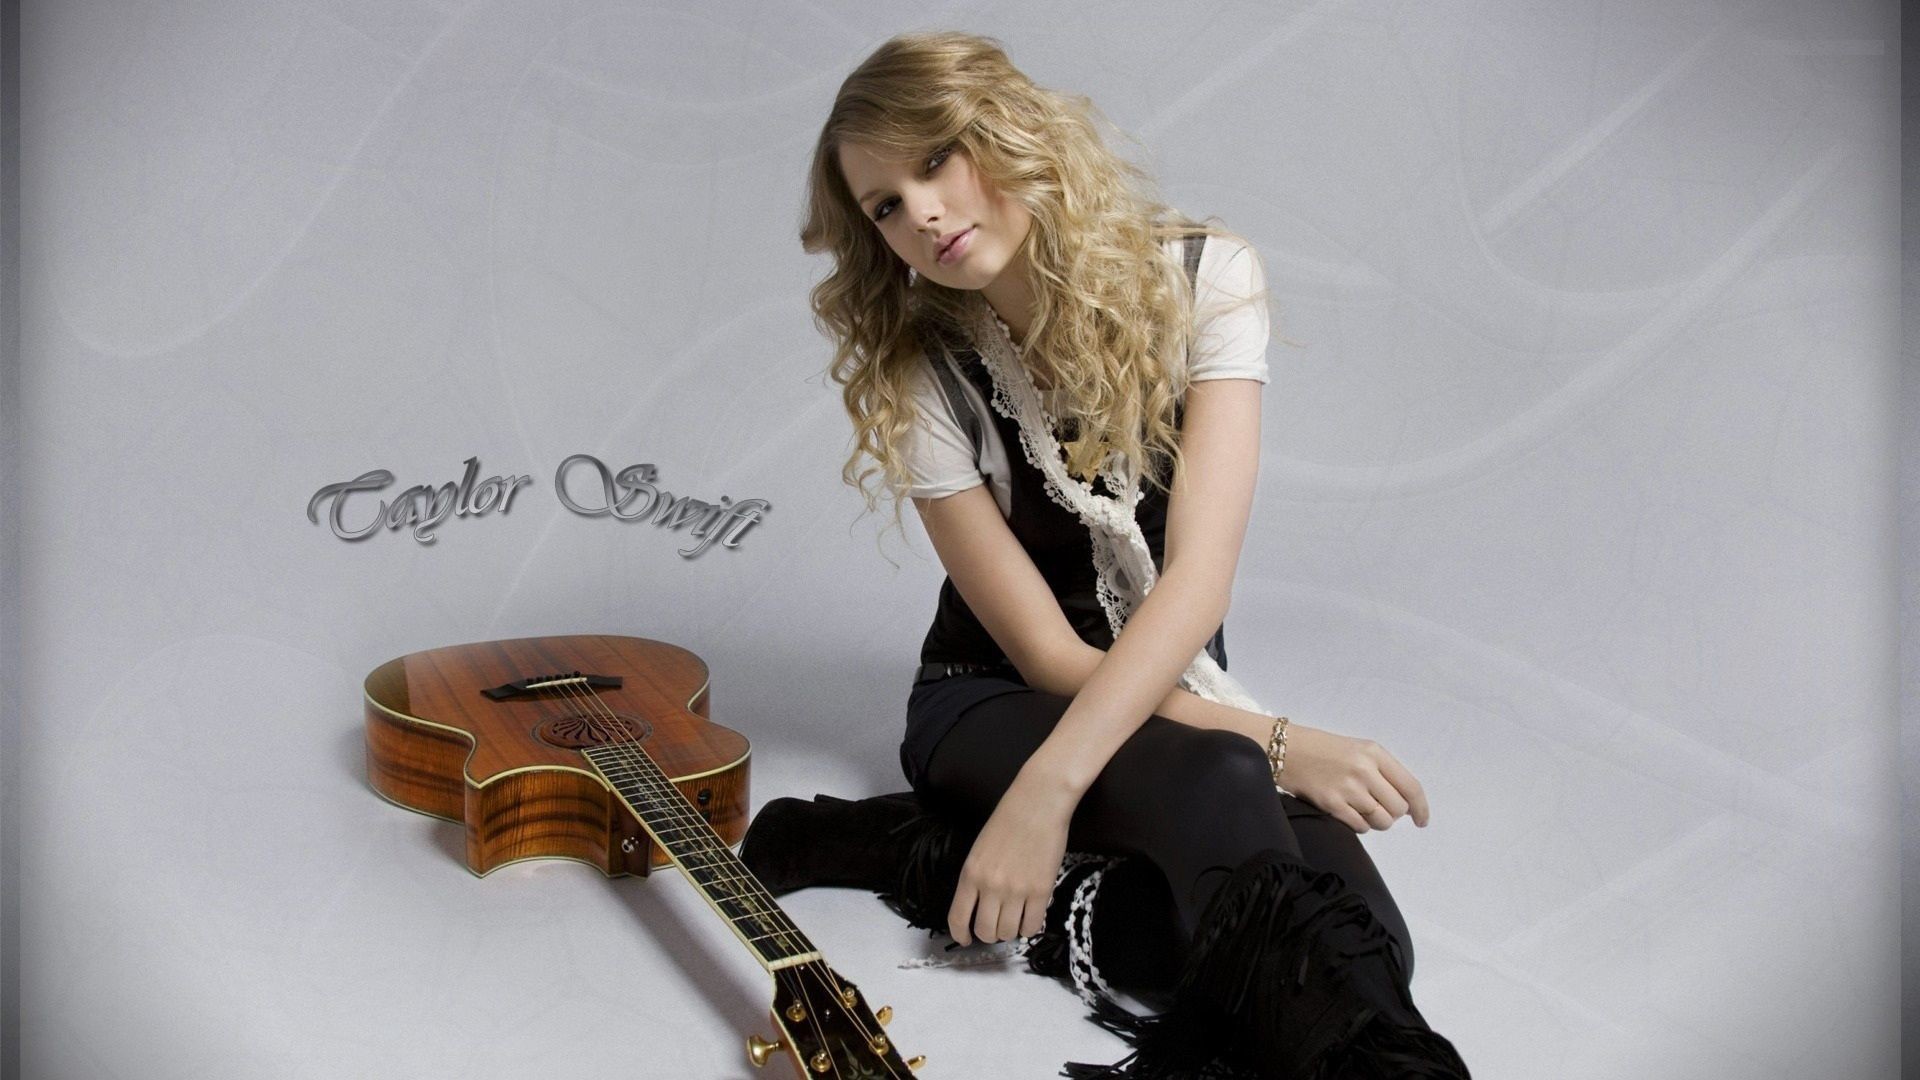 1920x1080 Taylor-Swift-With-Music-Guitar-Girl-HD-Wallpapers -